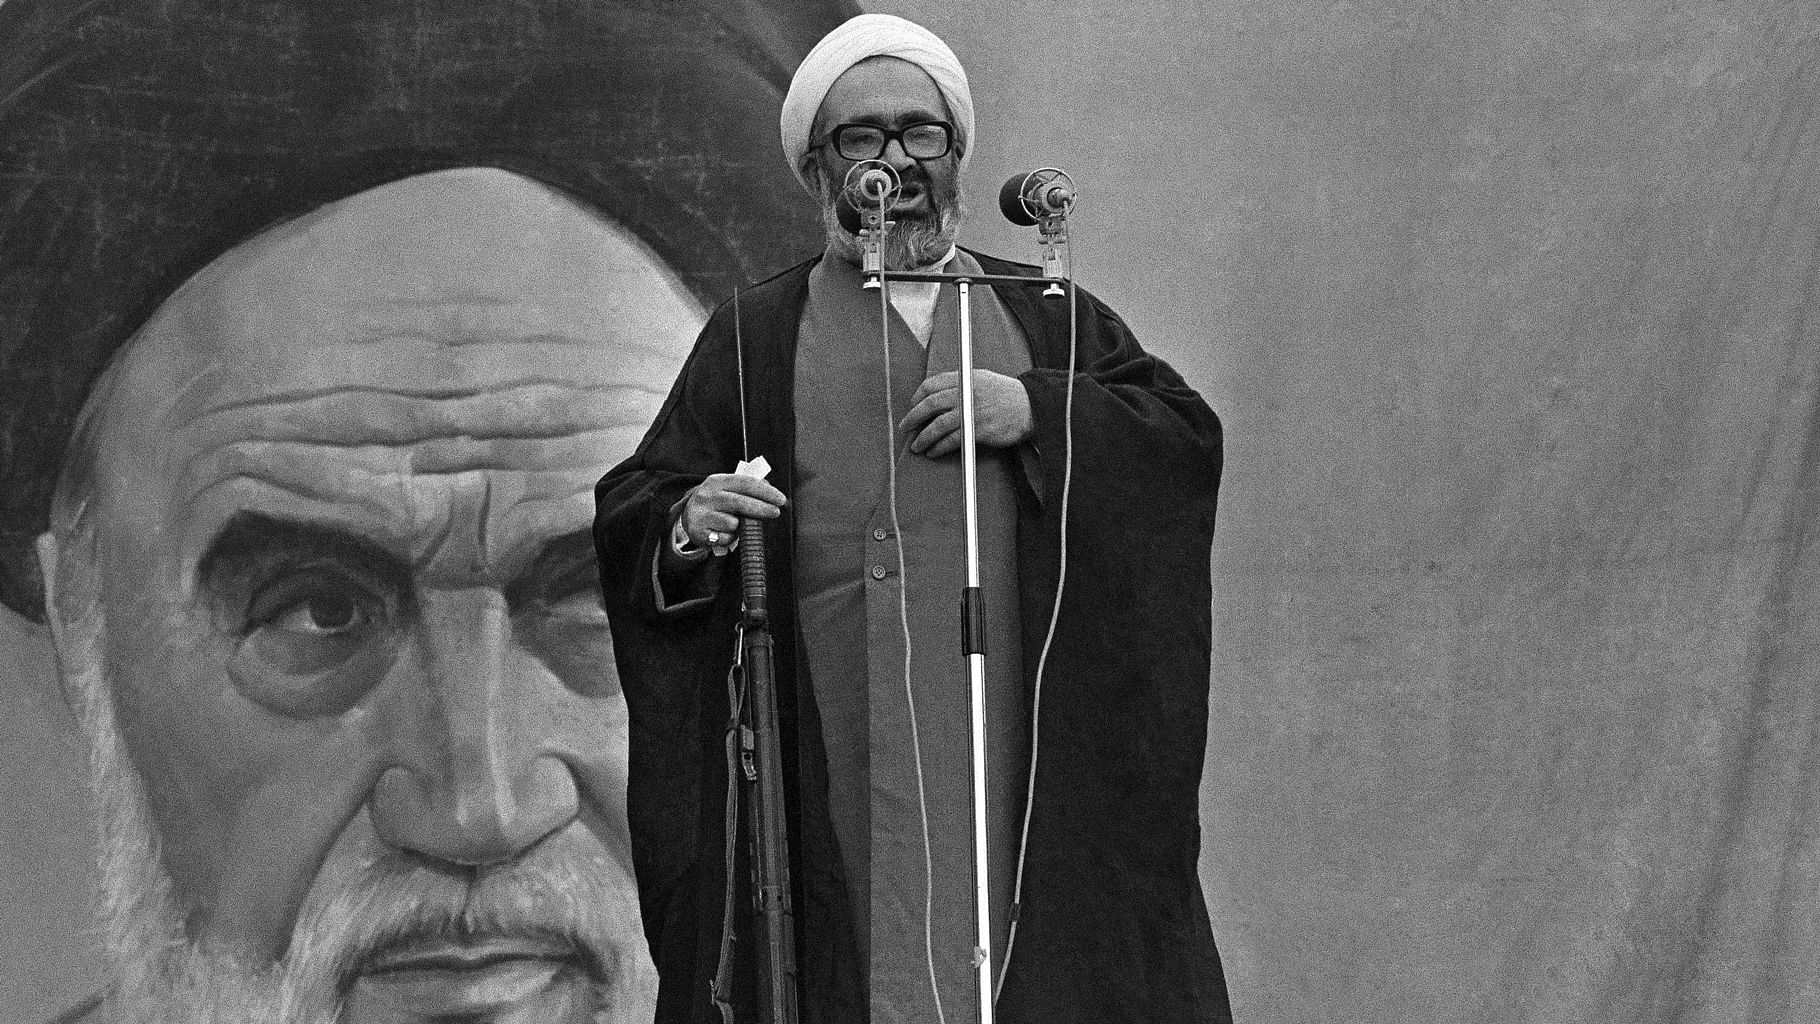 Grand Ayatollah Hossein Ali Montazeri condemning Iran’s execution of thousands of prisoners at the end of the country’s bloody war with Iraq in 1988. (Photo: AP)